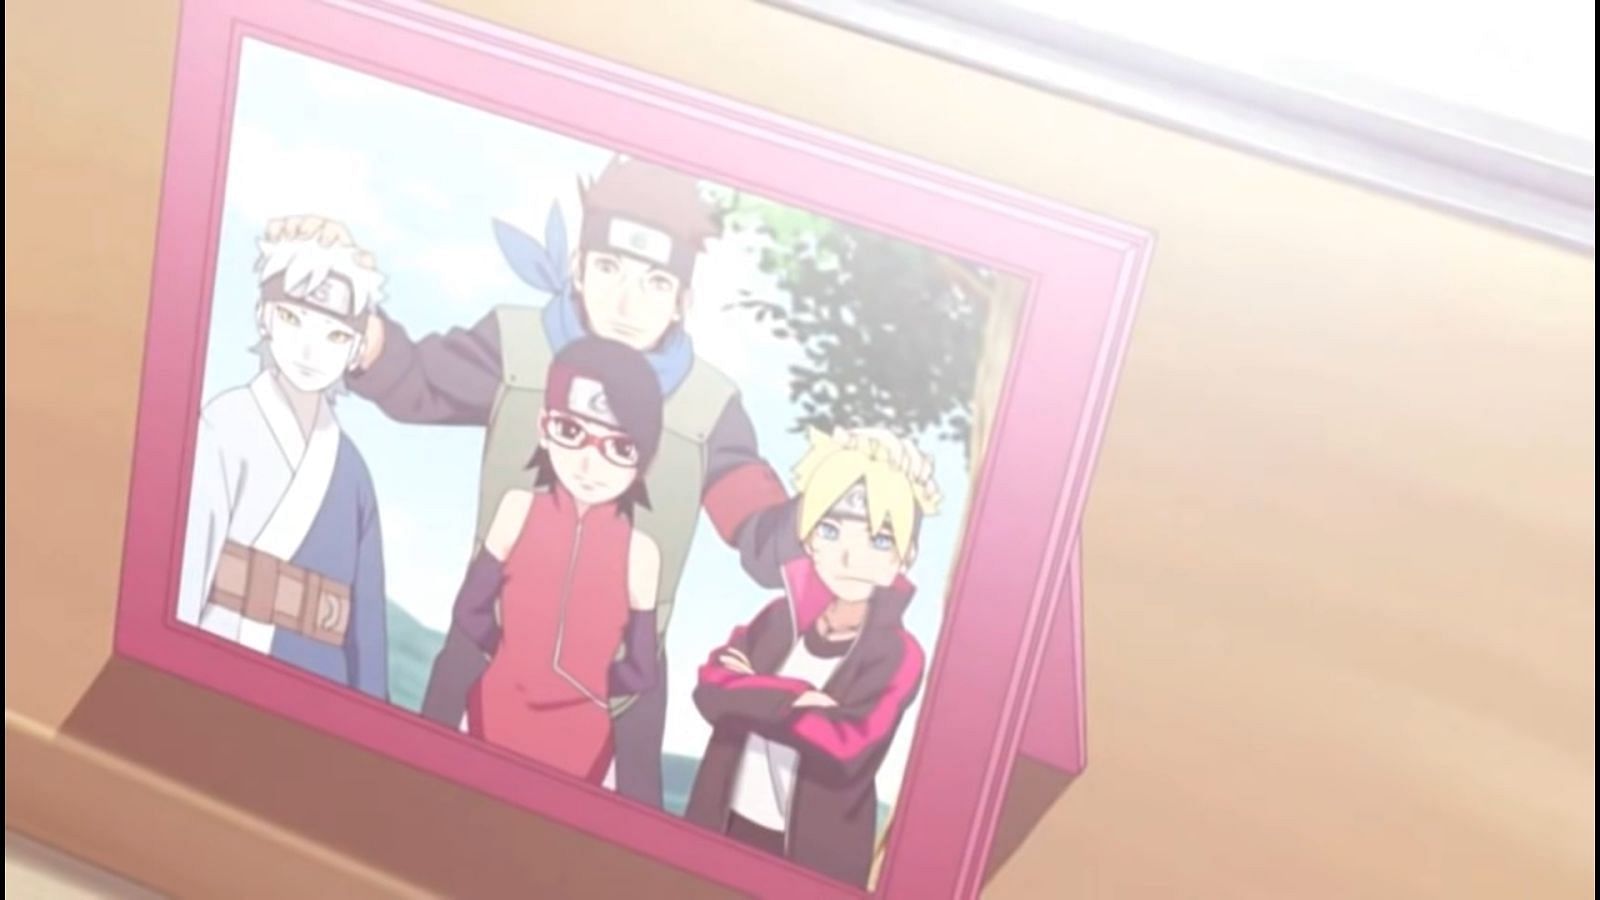 Team 7&#039;s picture in Sarada&#039;s room (Image via YouTube)